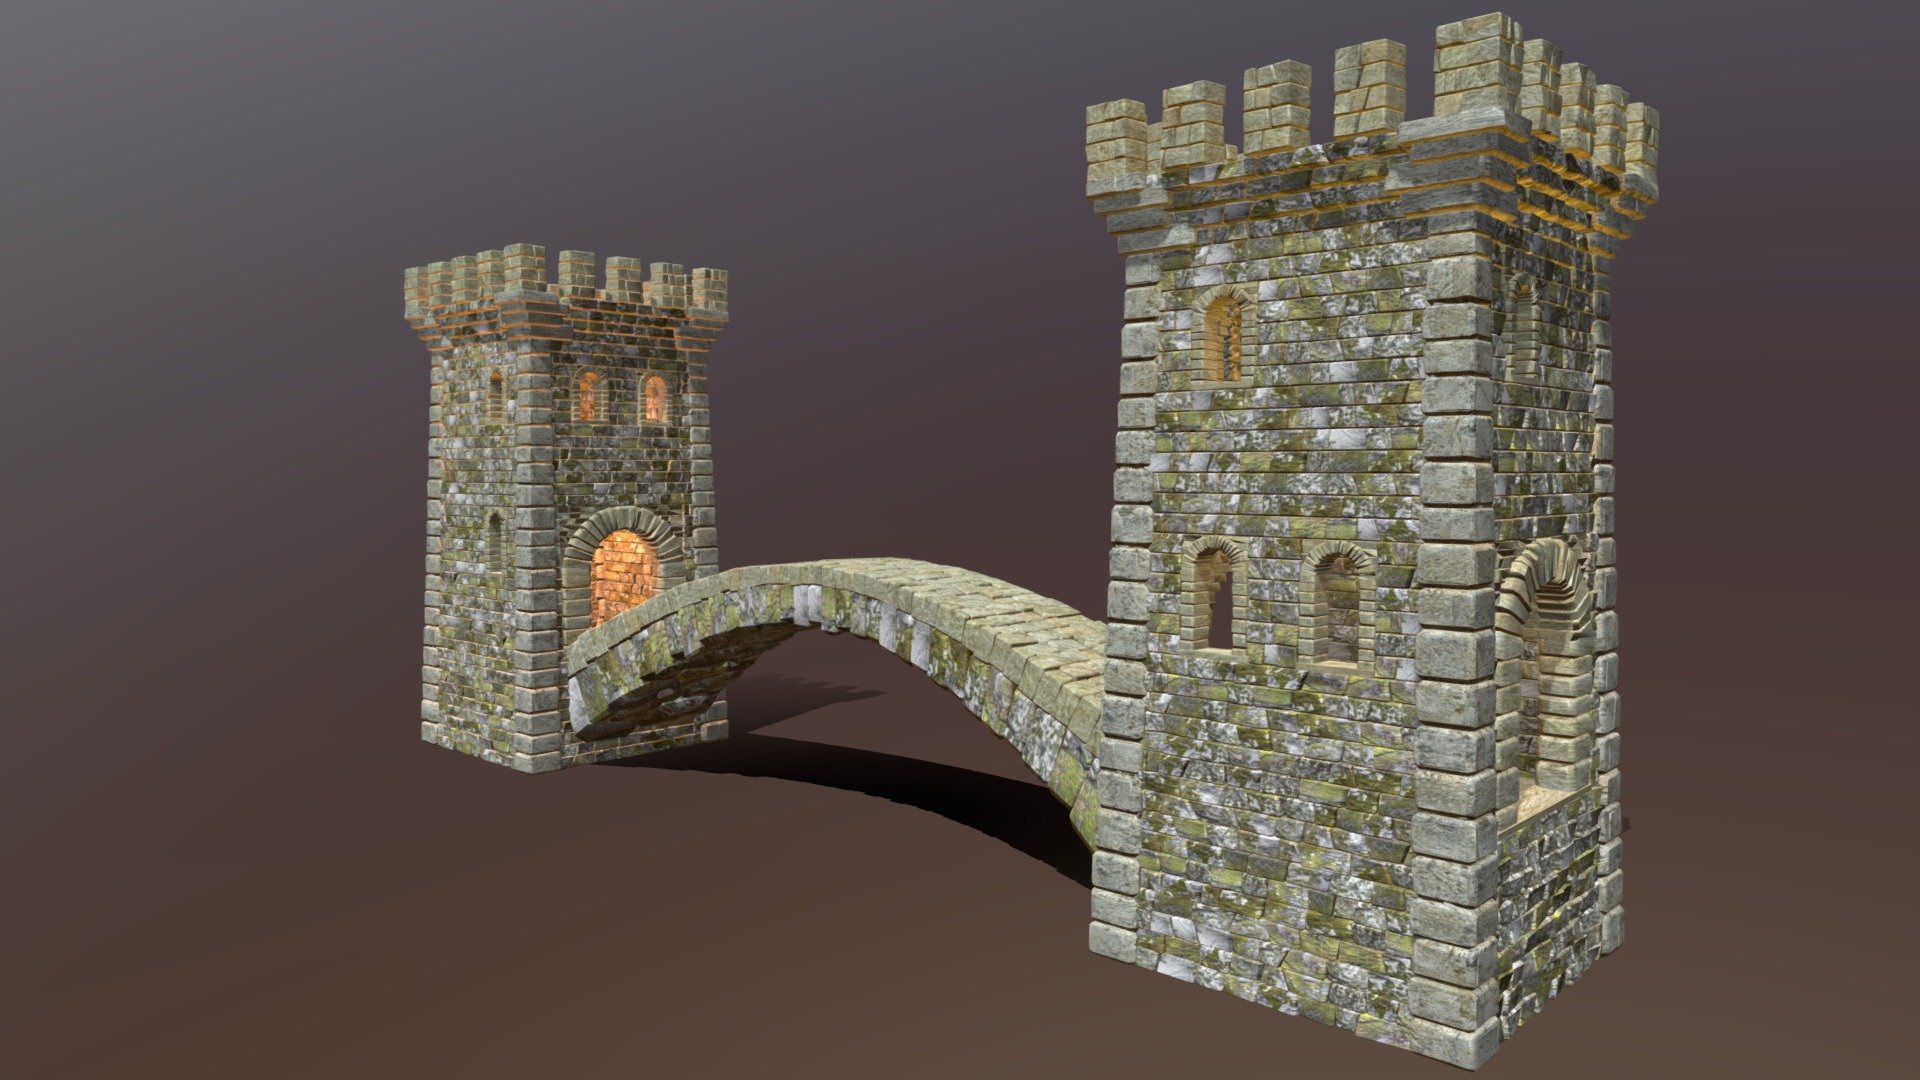 A stone arch bridge spans a moat between two medieval brick gate towers with battlements. All bricks of the 3D model are individually shaped and textured 3d model